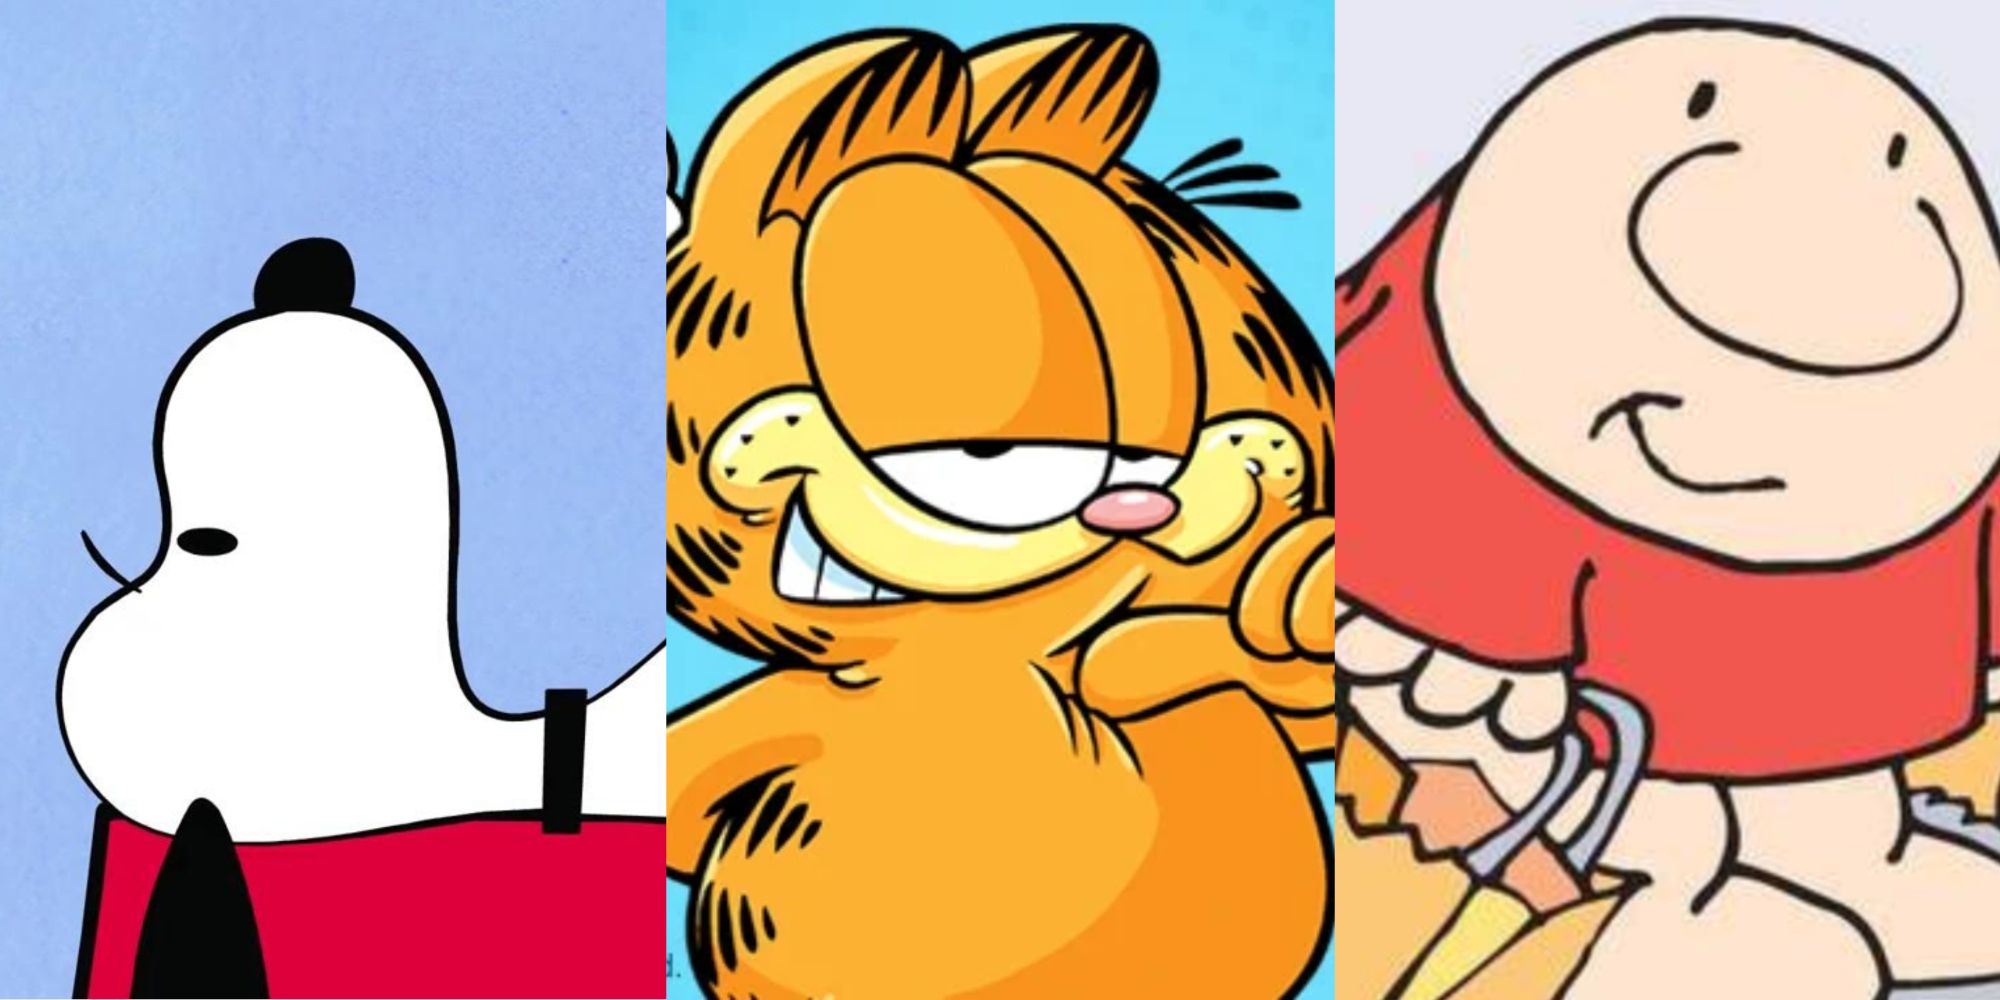 Split colored Image of Snoopy, Garfield, and Ziggy in their comic strips